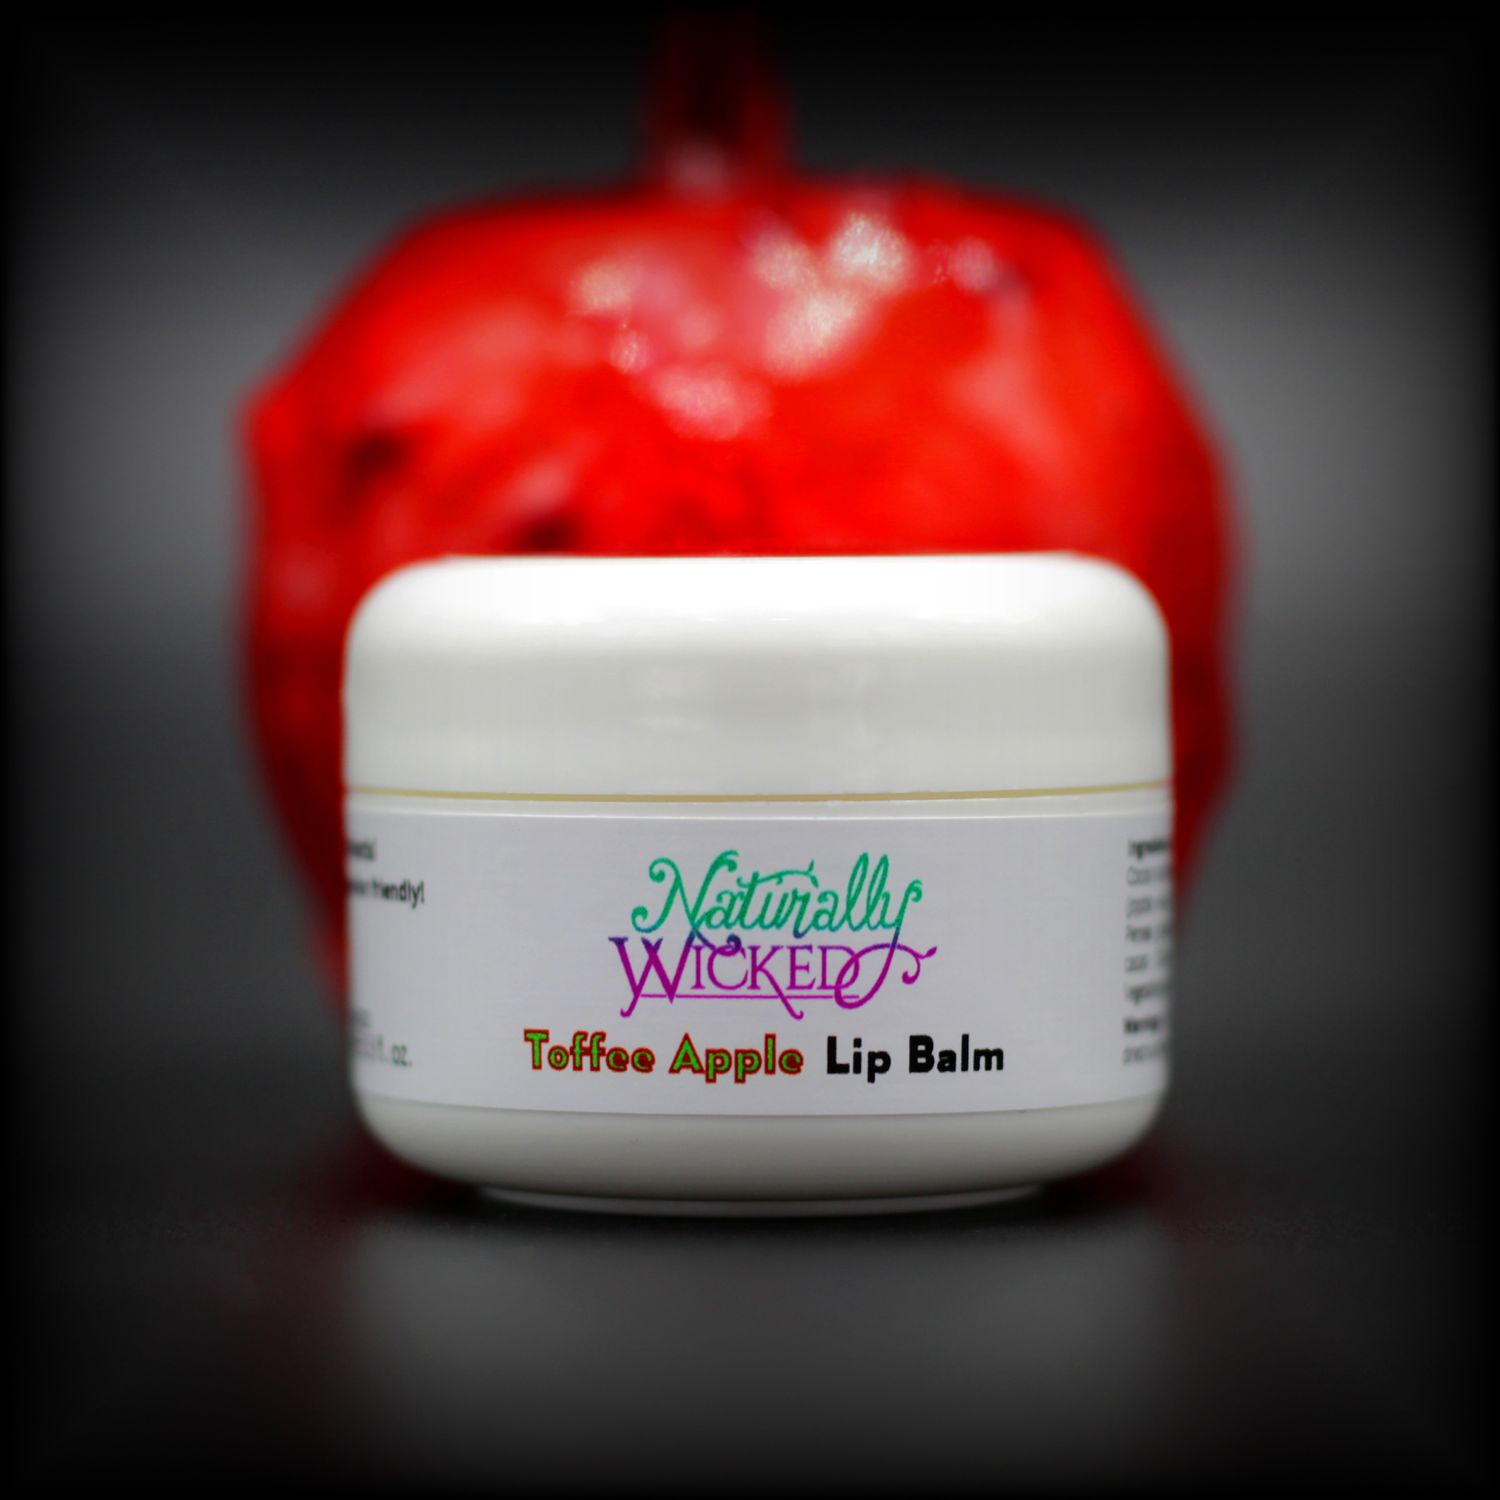 Naturally Wicked Toffee Apple Lip Balm With Bright Red Toffee Apple Behind